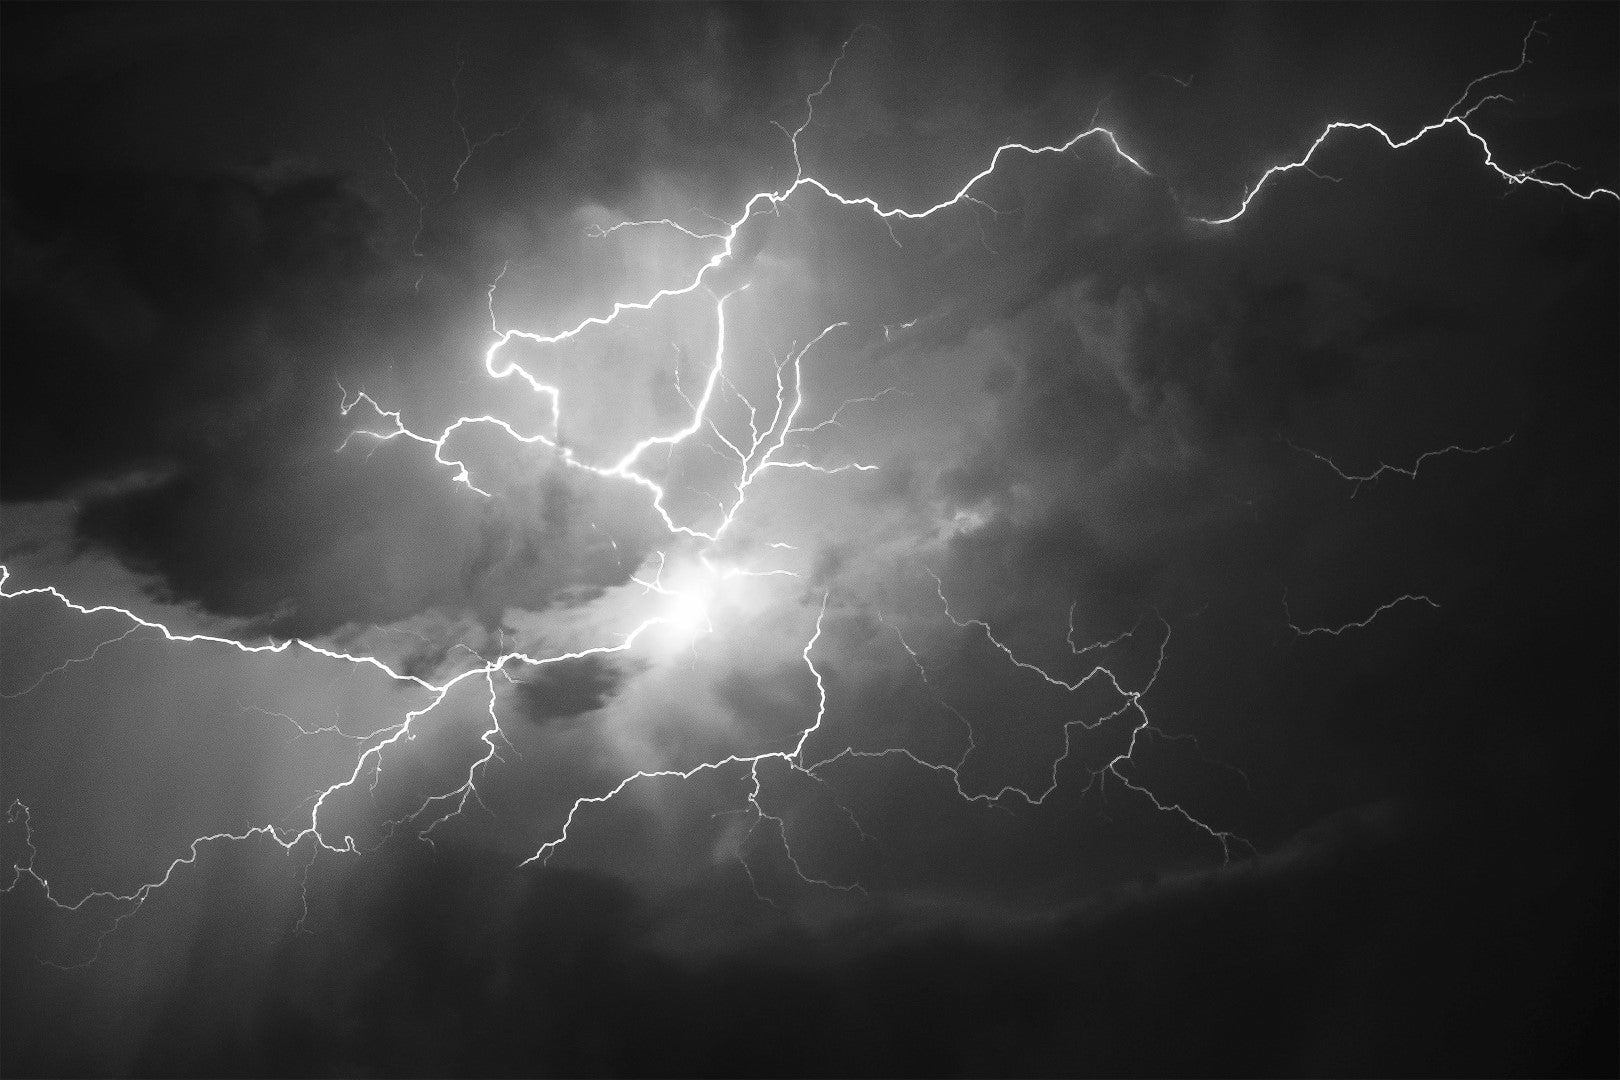 How to Get Started with Lightning Photography